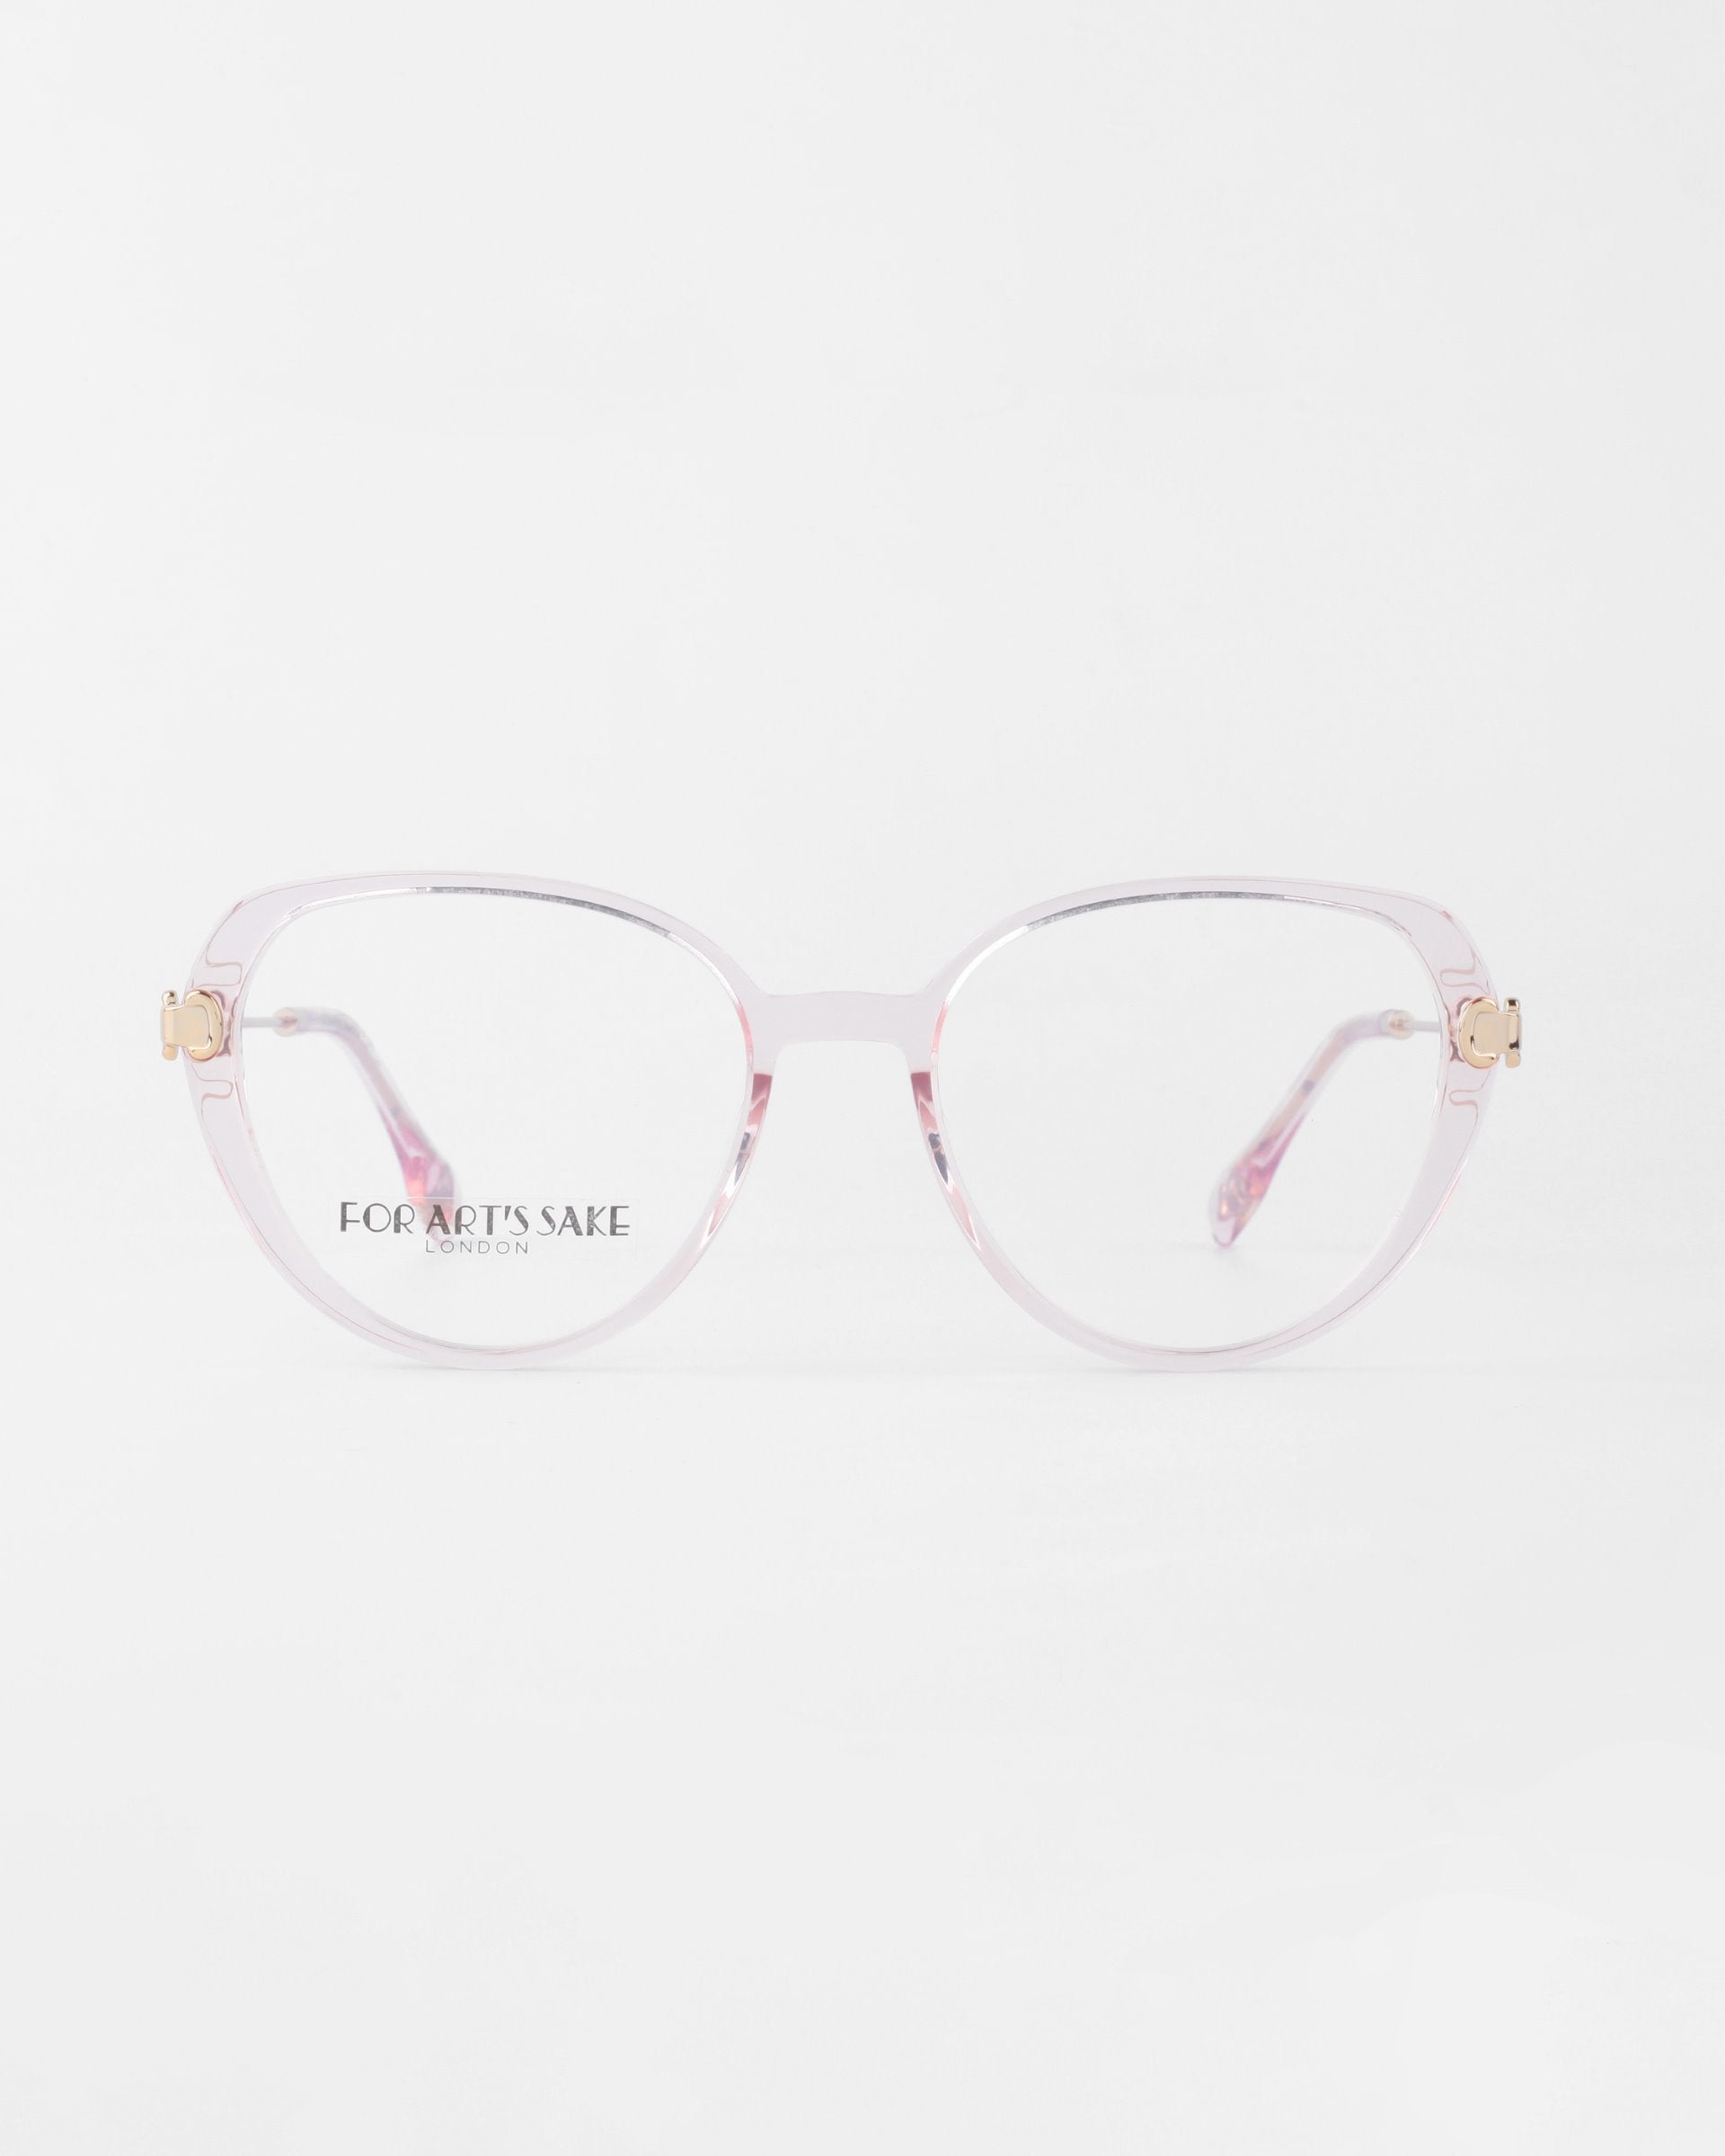 A pair of transparent glasses with light pink rims and thin pink arms. The brand name "For Art's Sake®" is visible on the left lens in black letters, with "LONDON" written below it. Featuring prescription lenses, the Waterhouse glasses are displayed against a plain, white background.